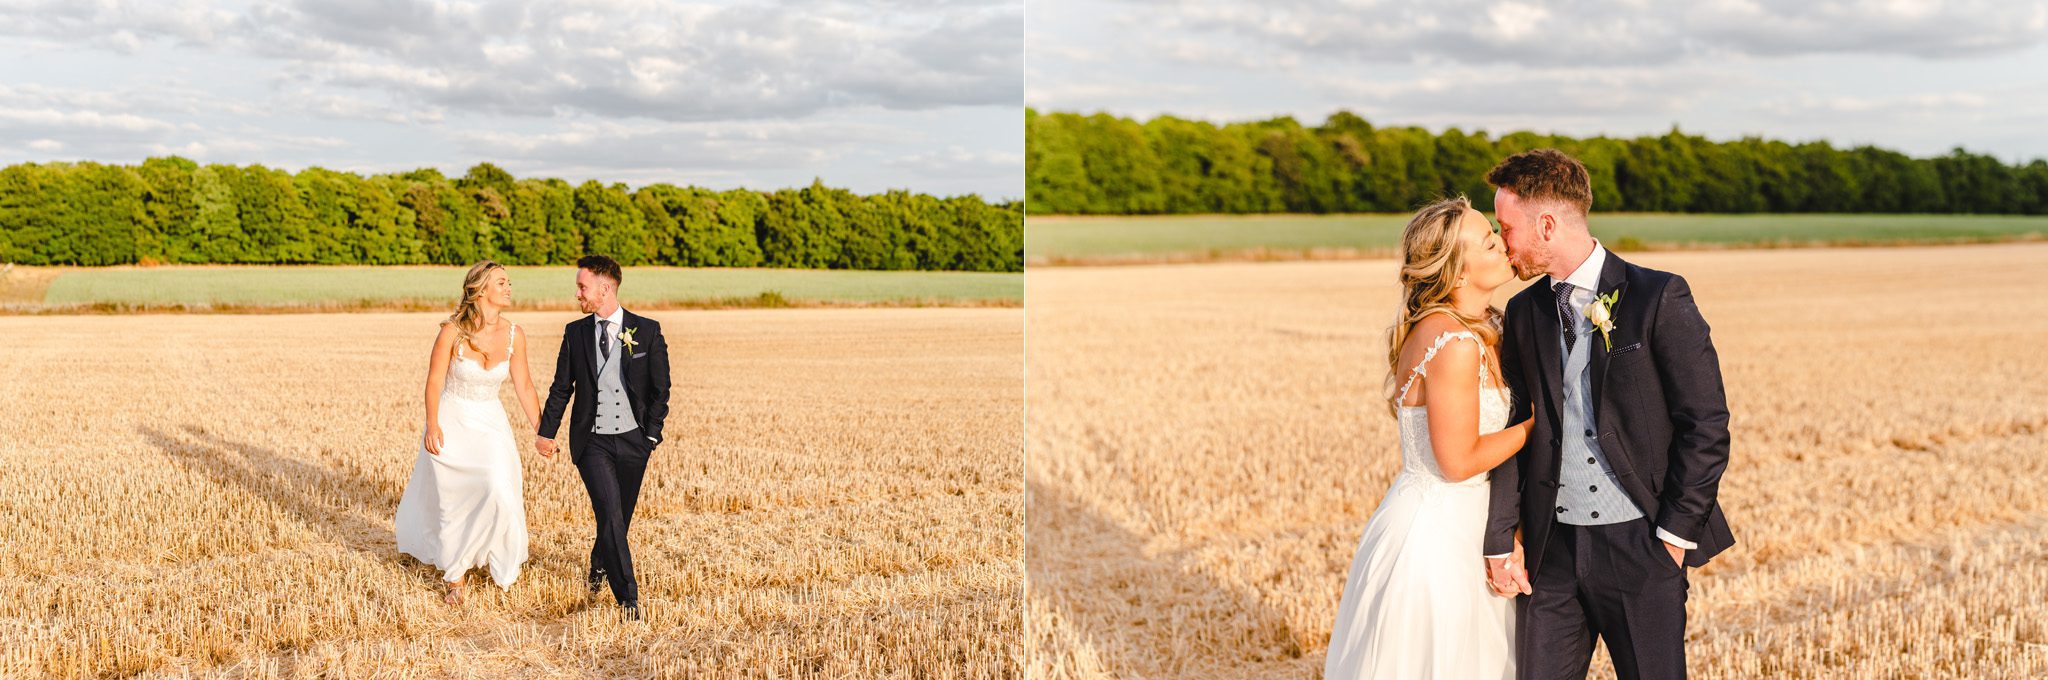 Bride and Groom walking in a cornfield during the golden hour